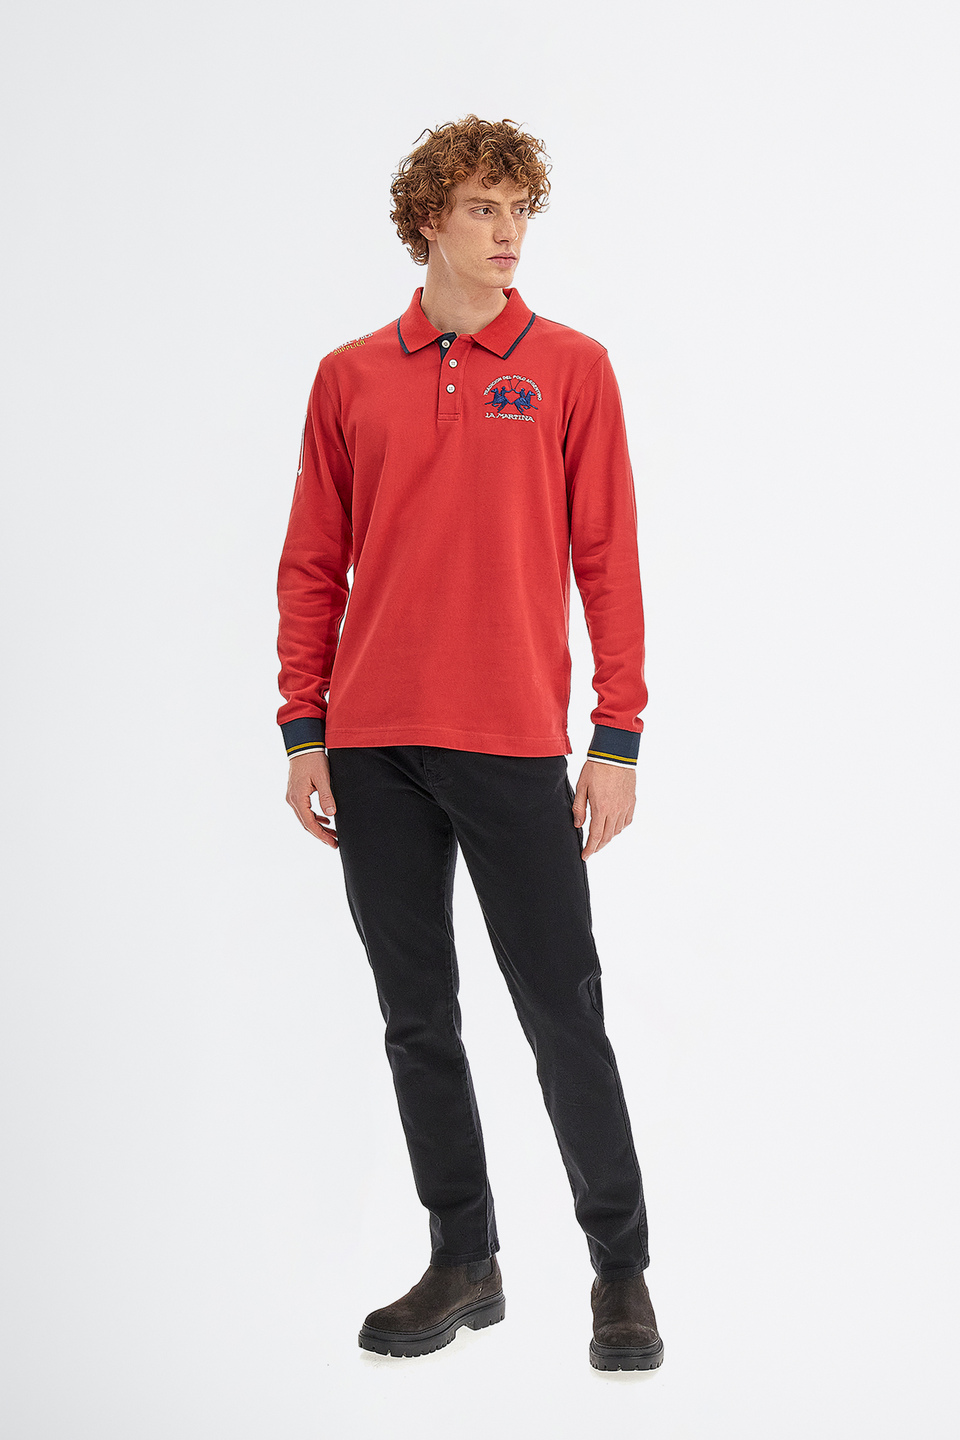 Men’s polo shirt in cotton jersey long sleeves slim fit | La Martina - Official Online Shop